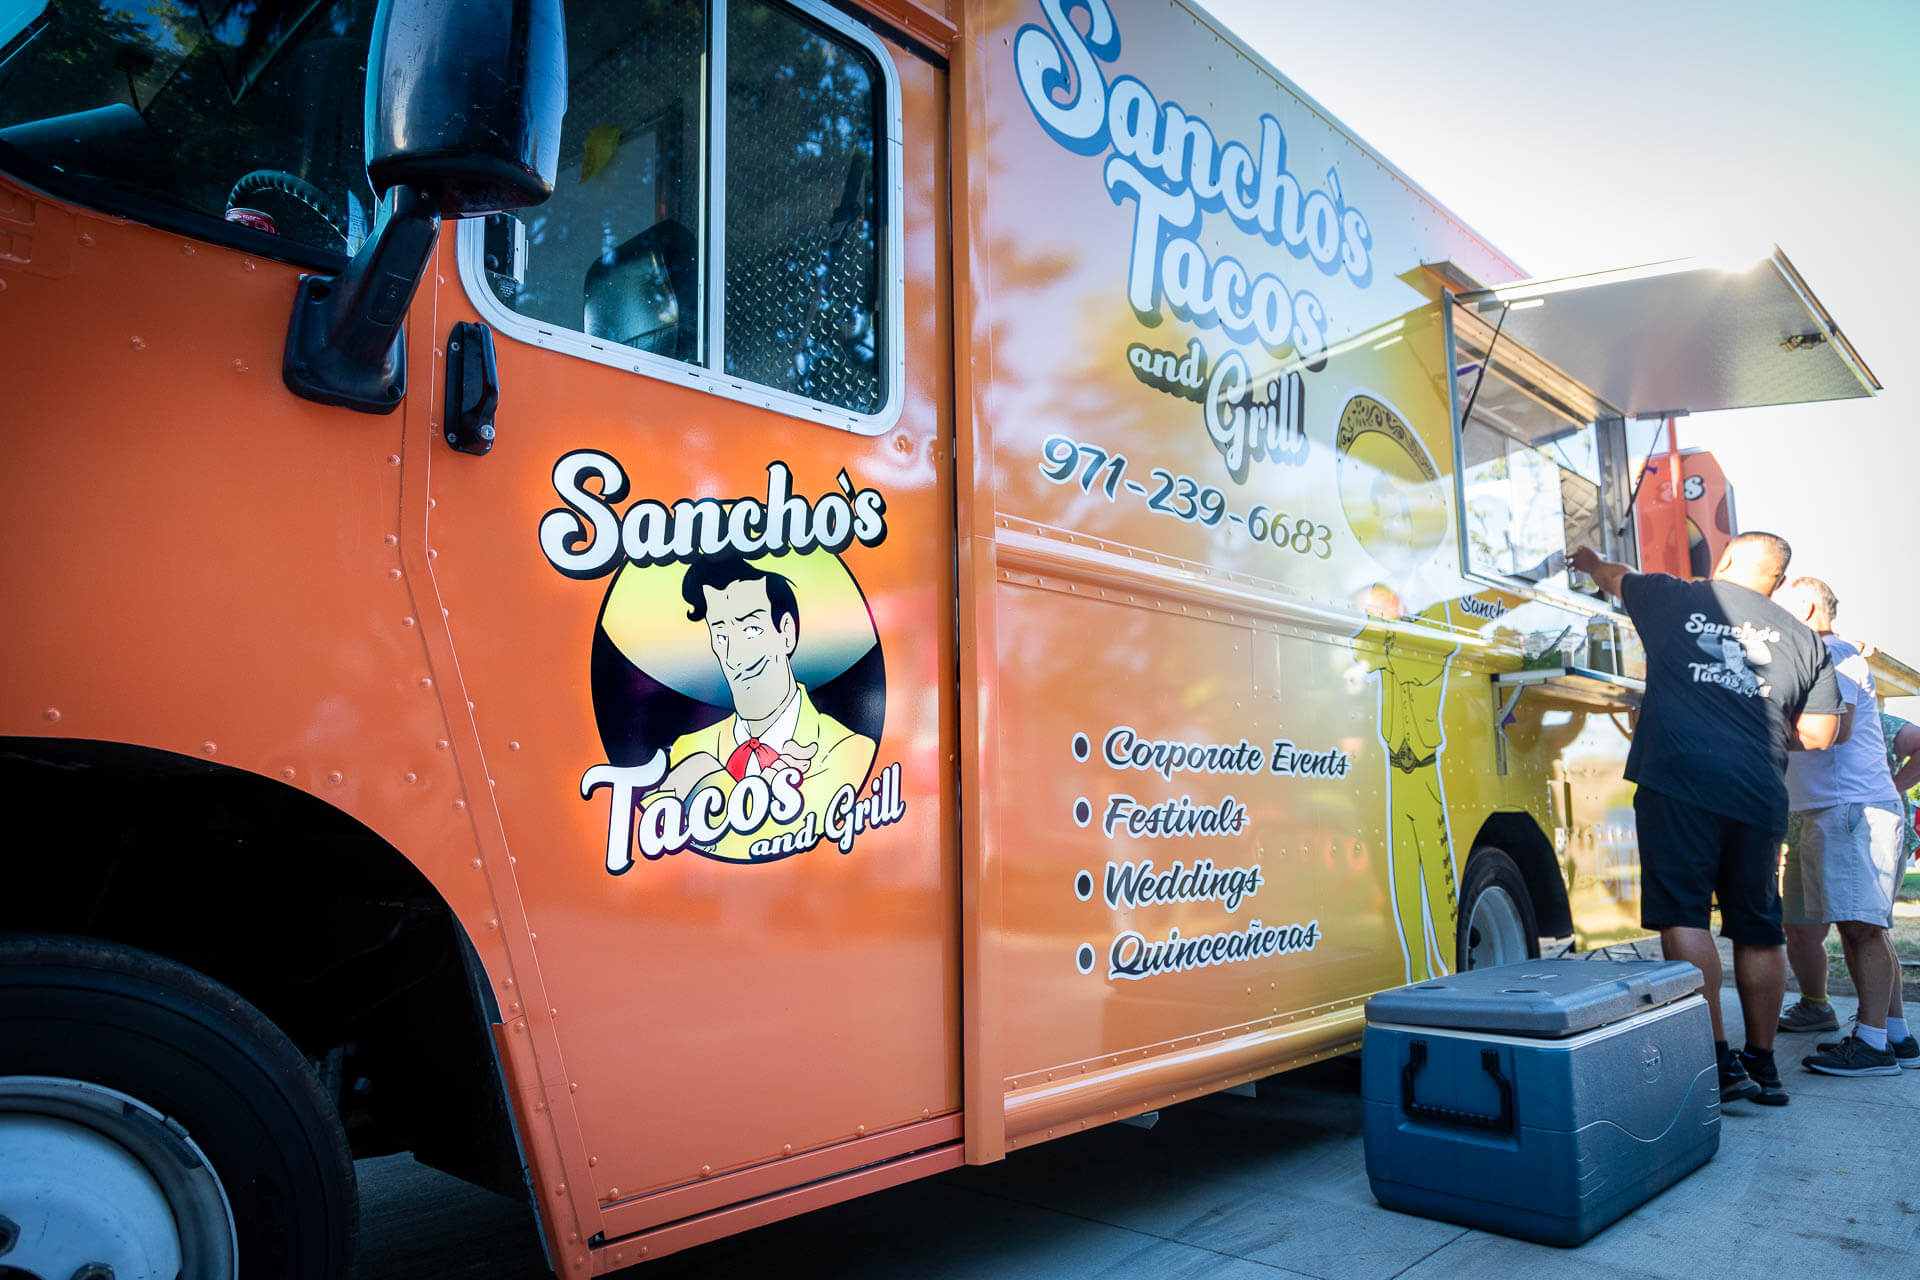 A picture of the Sanchos Taco truck